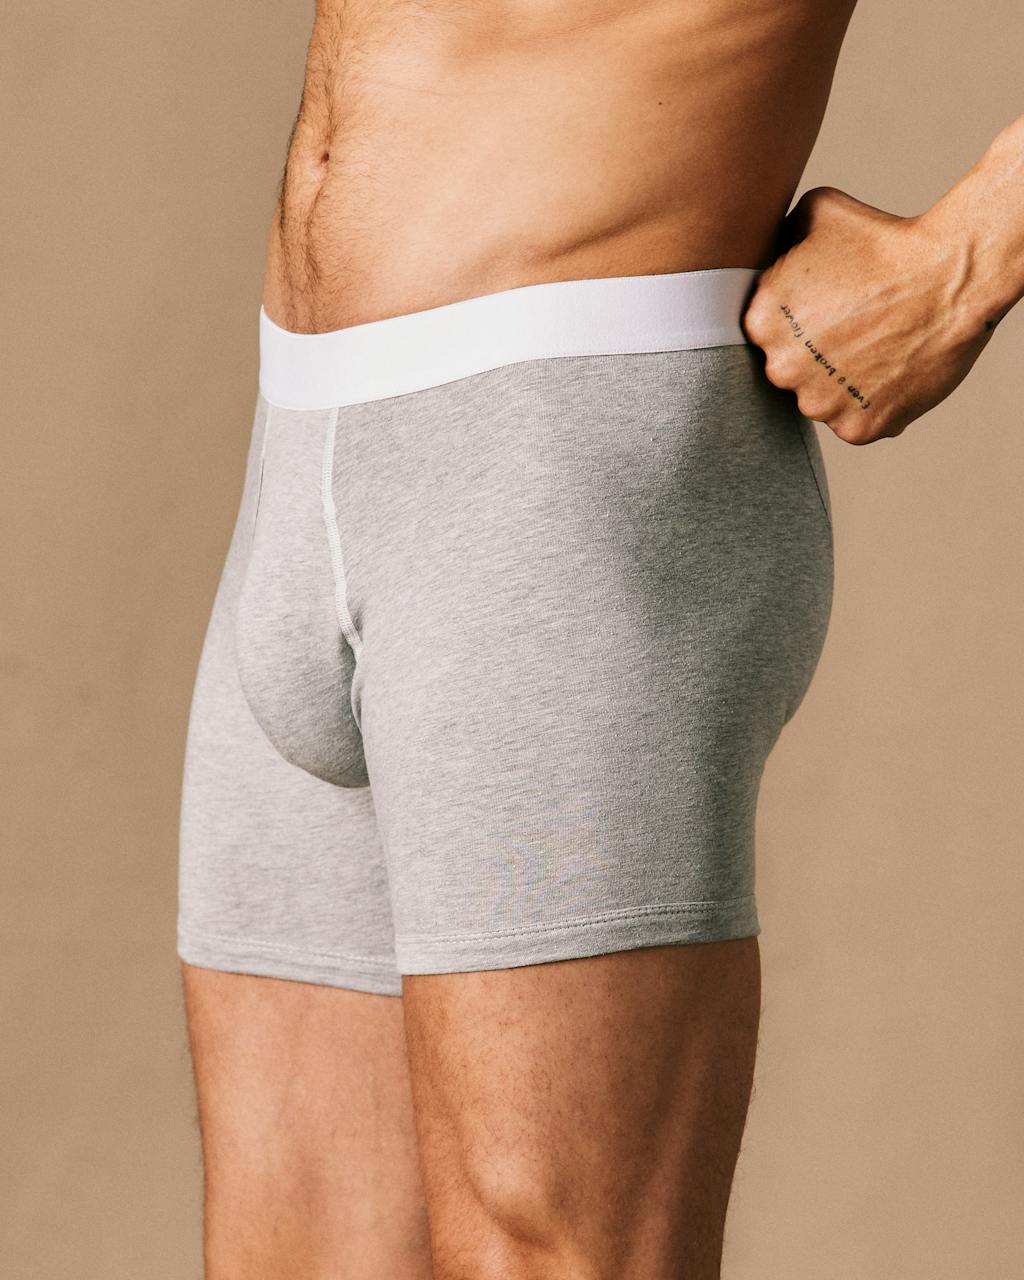 History of Men's Boxers, Briefs, and Boxer Briefs - HubPages